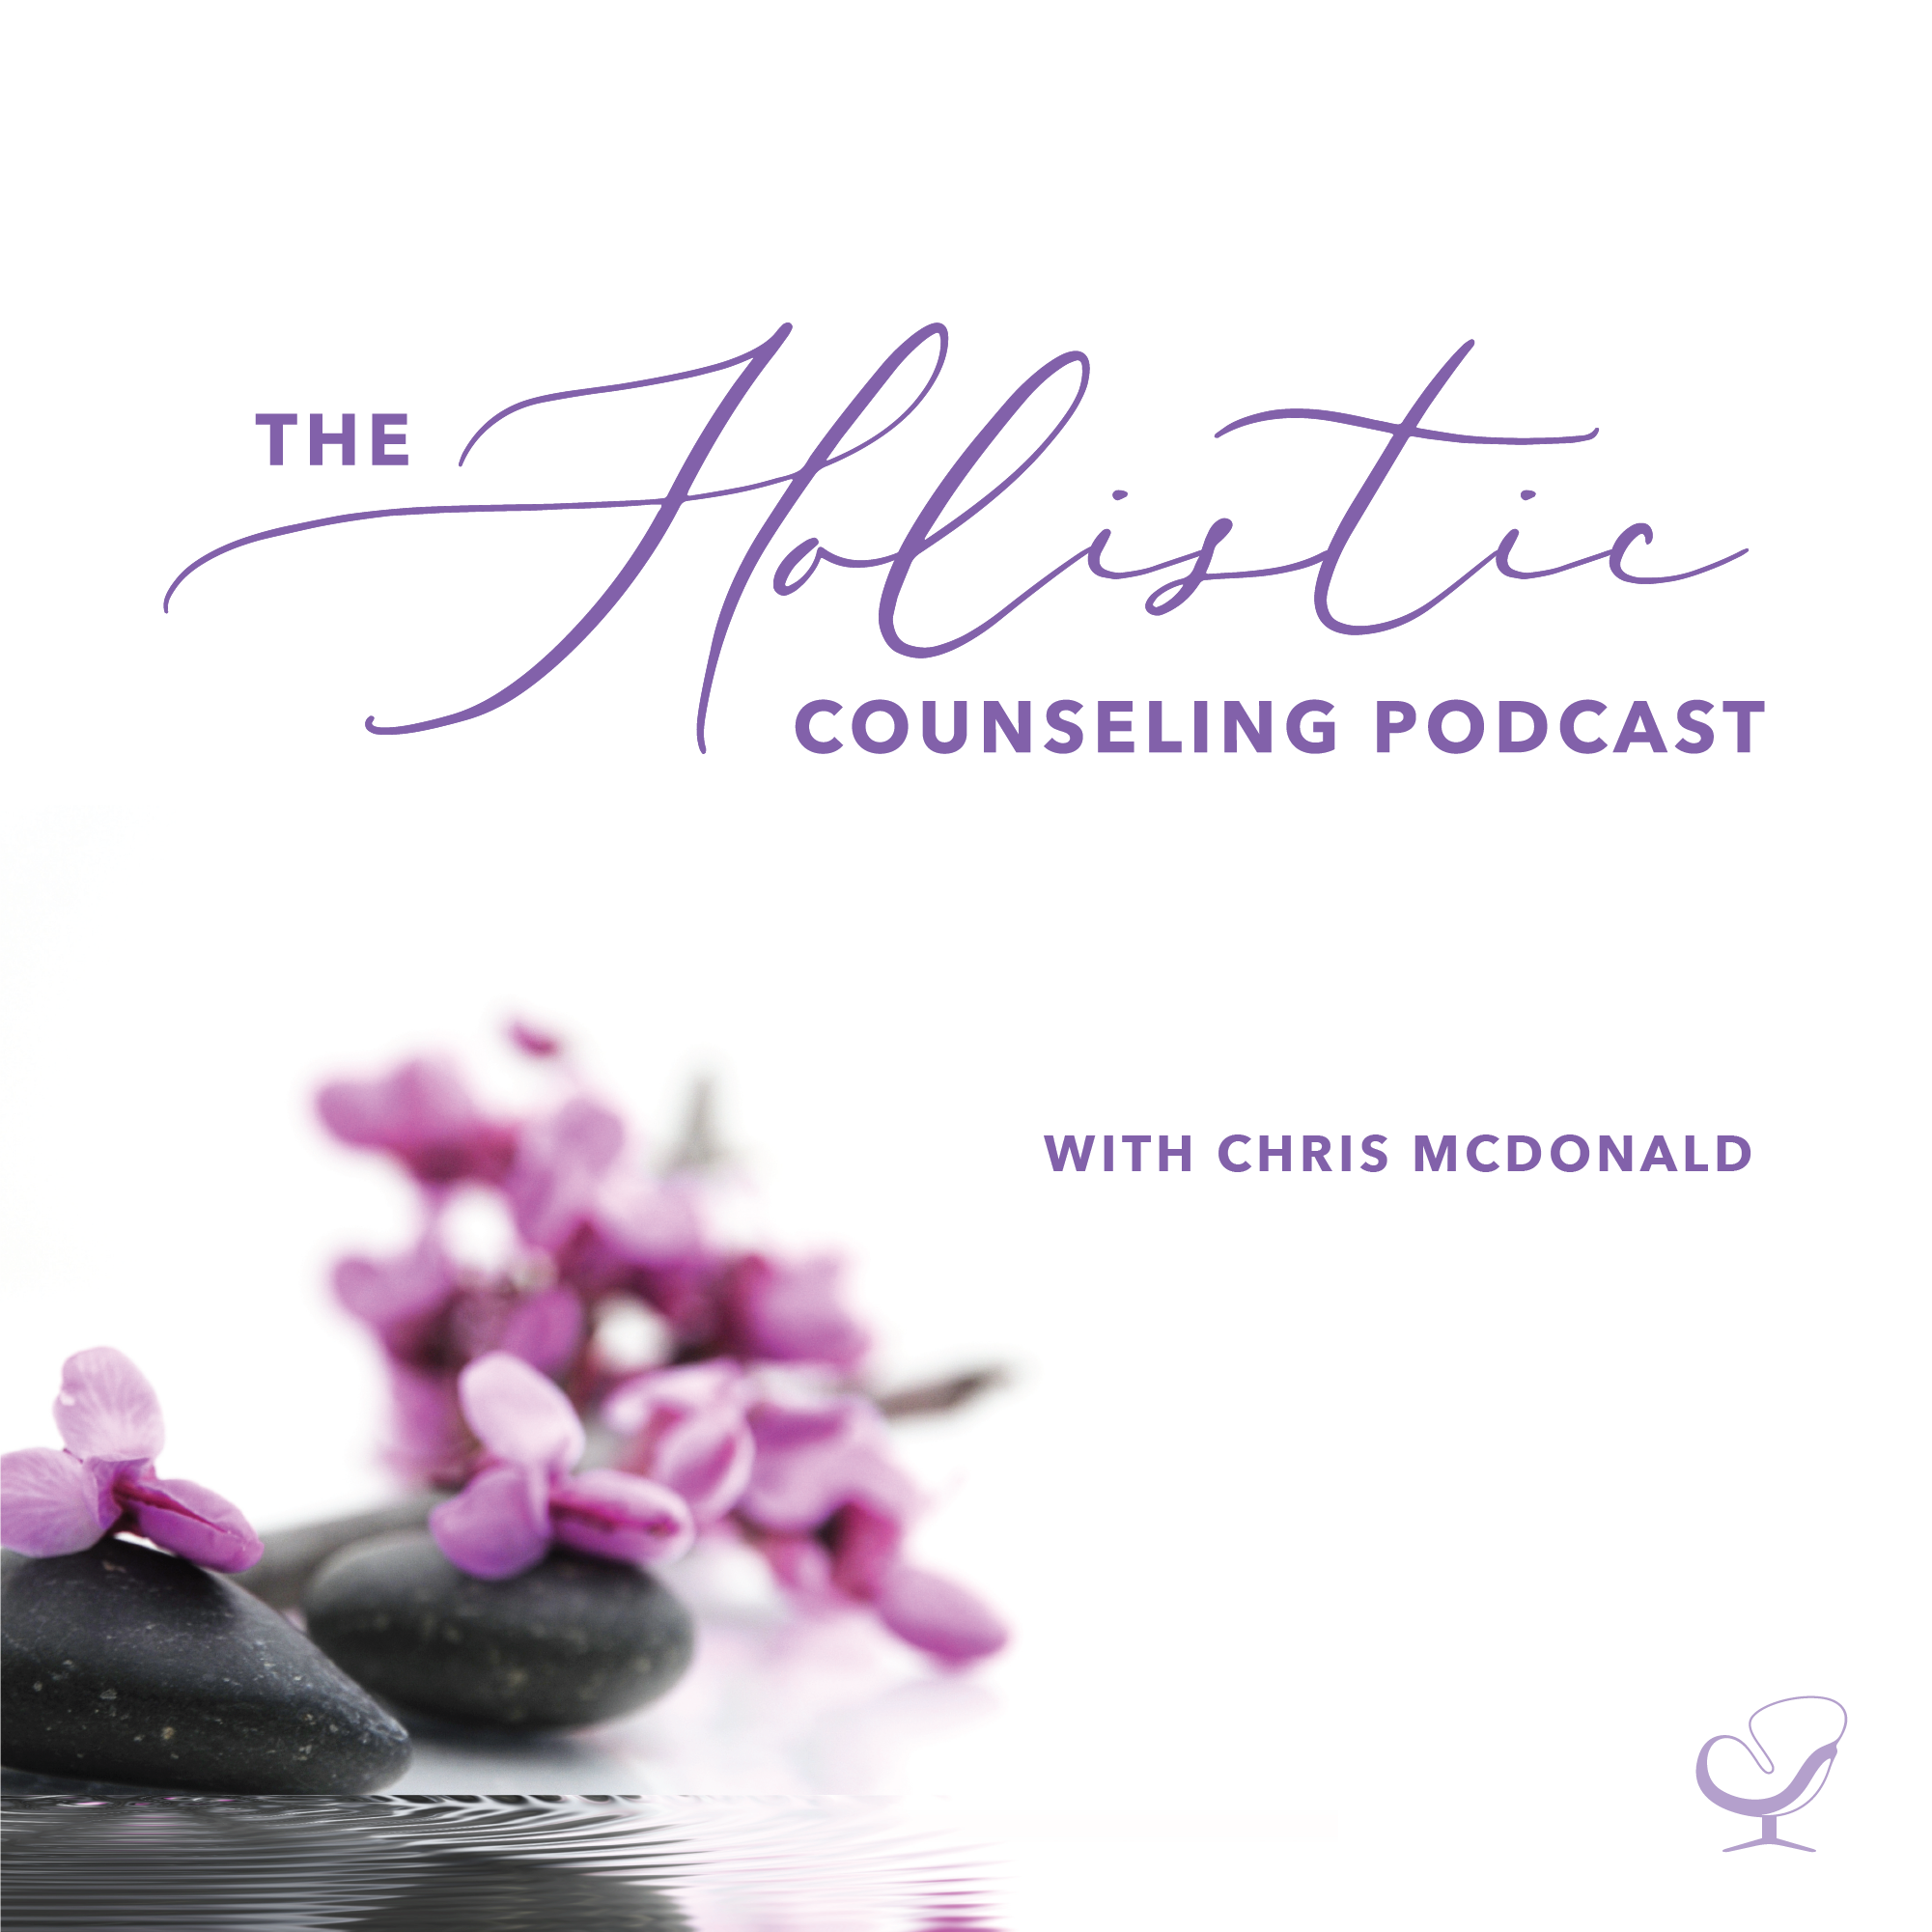 Come join my Email Course "Becoming a Holistic Counselor"